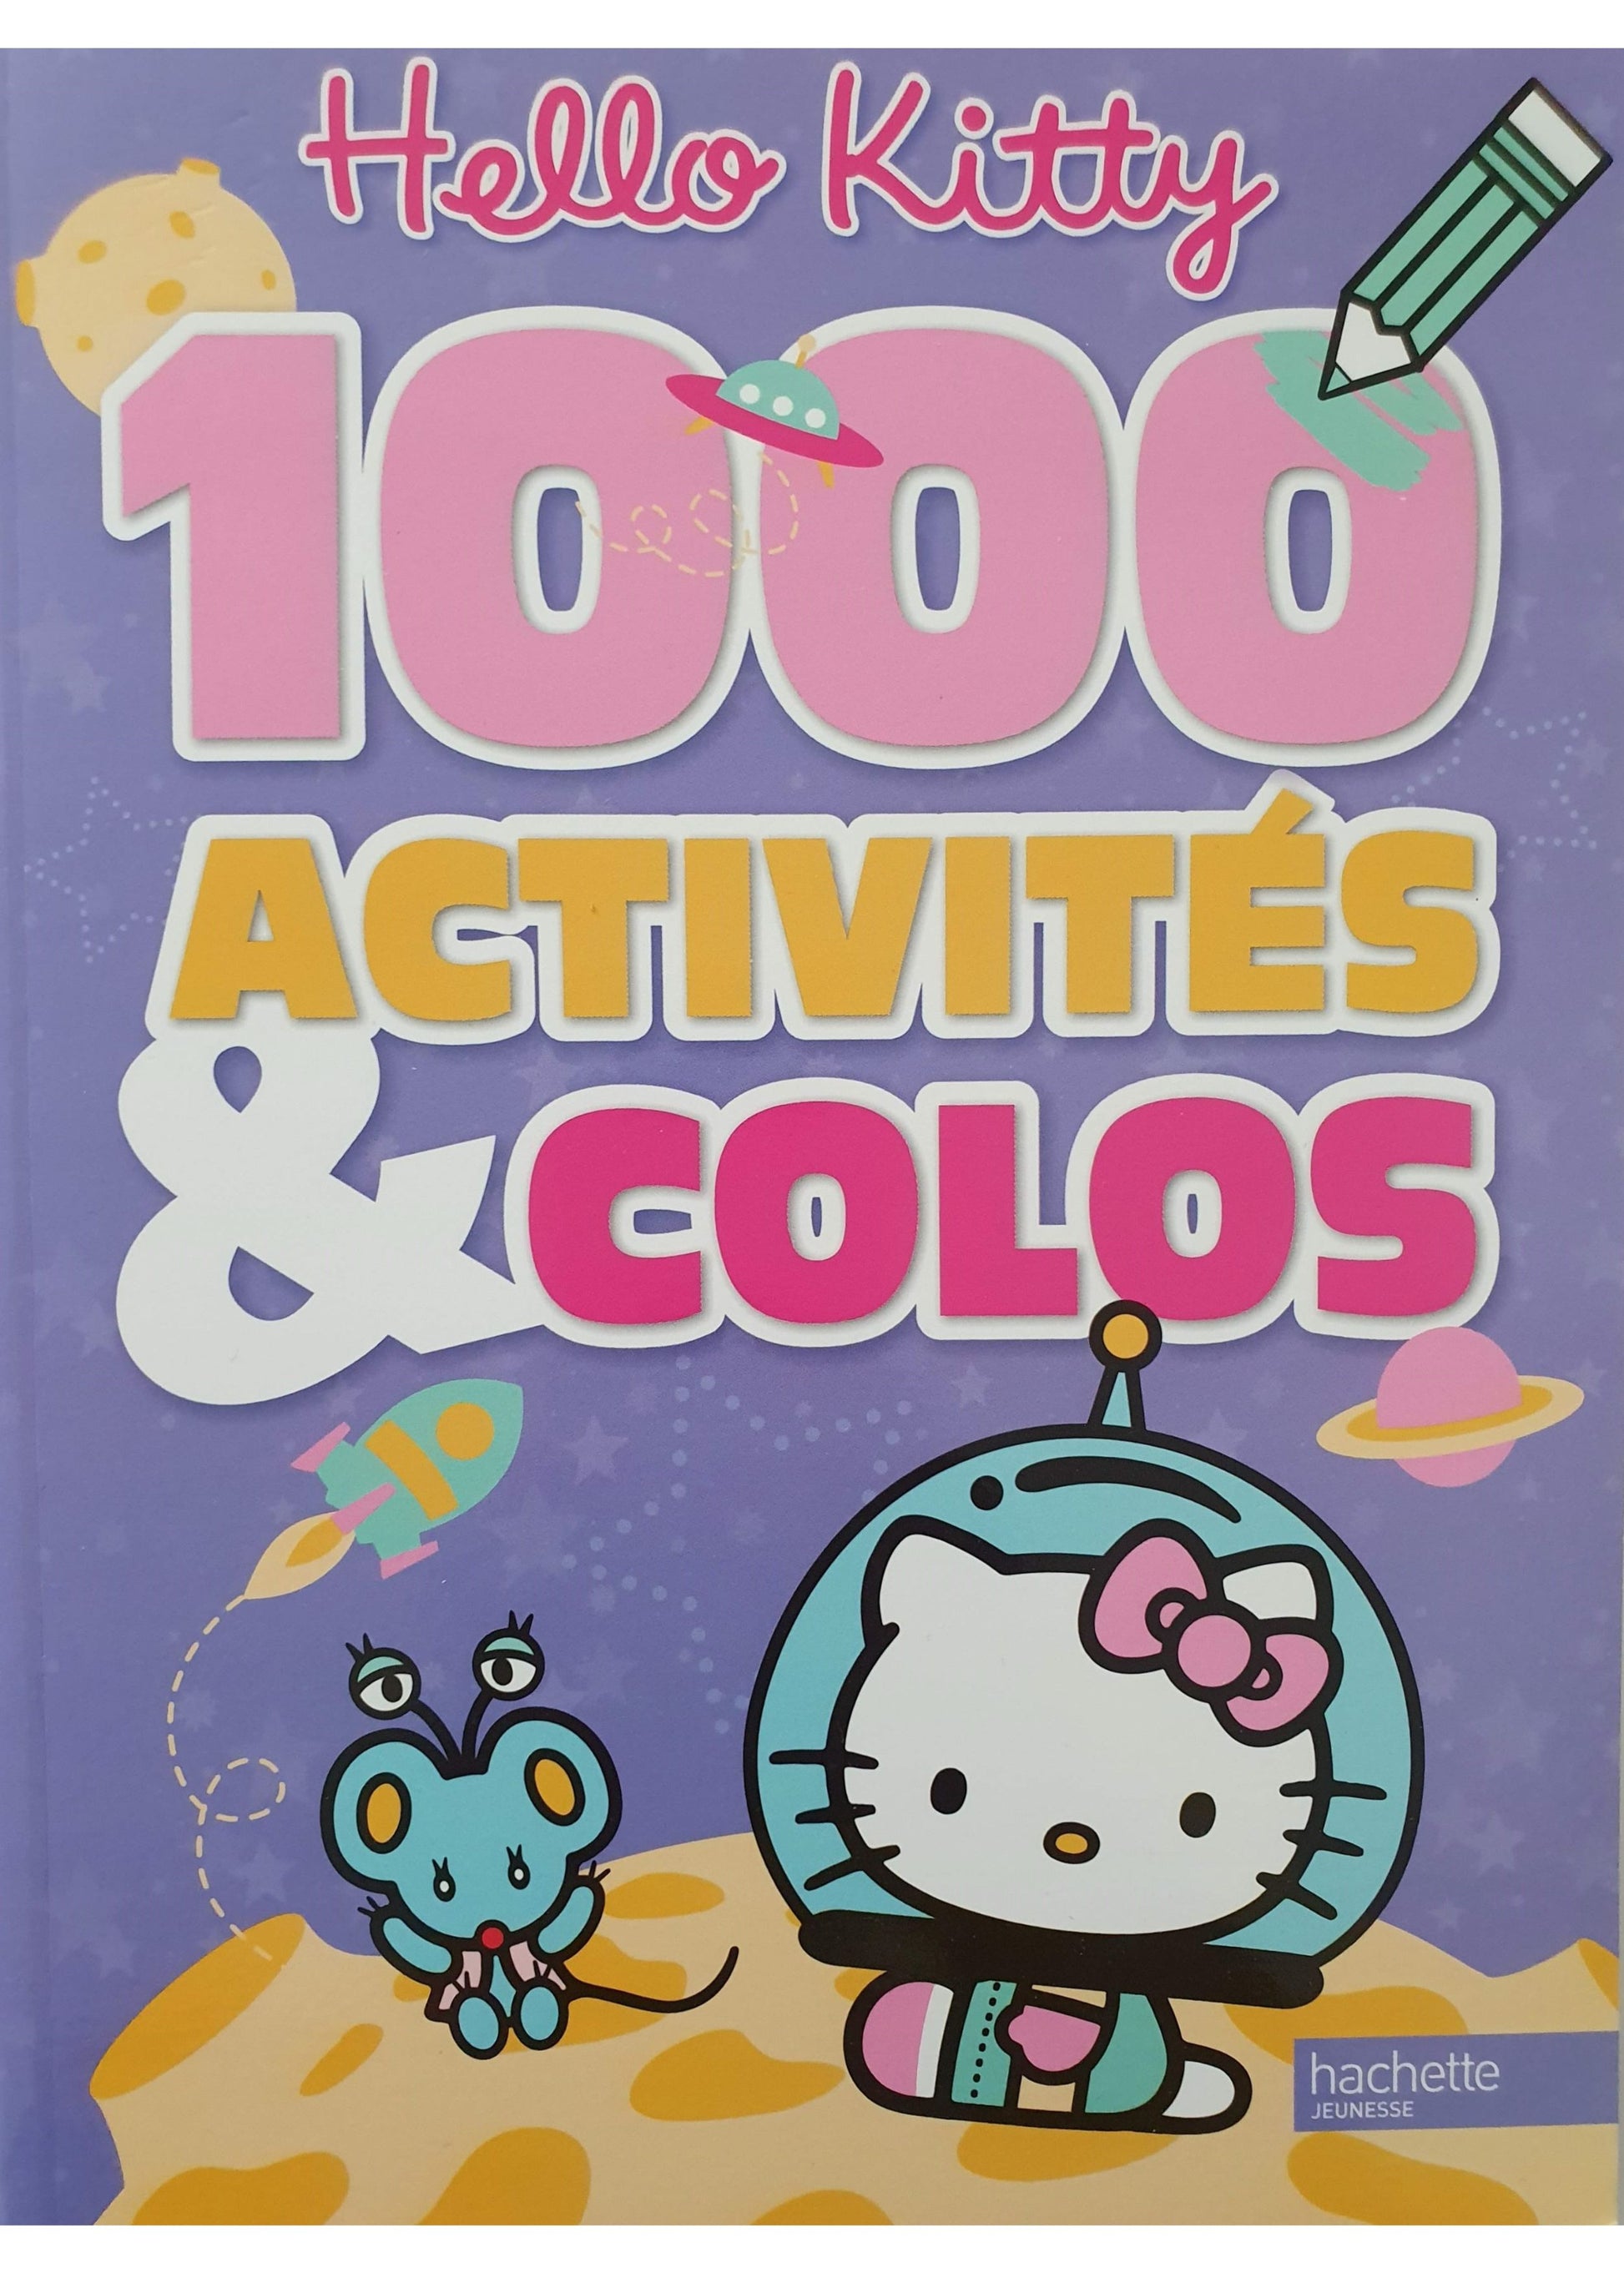 Hello Kitty-1000 Activities and Colos Like New Not Applicable  (4600971690039)